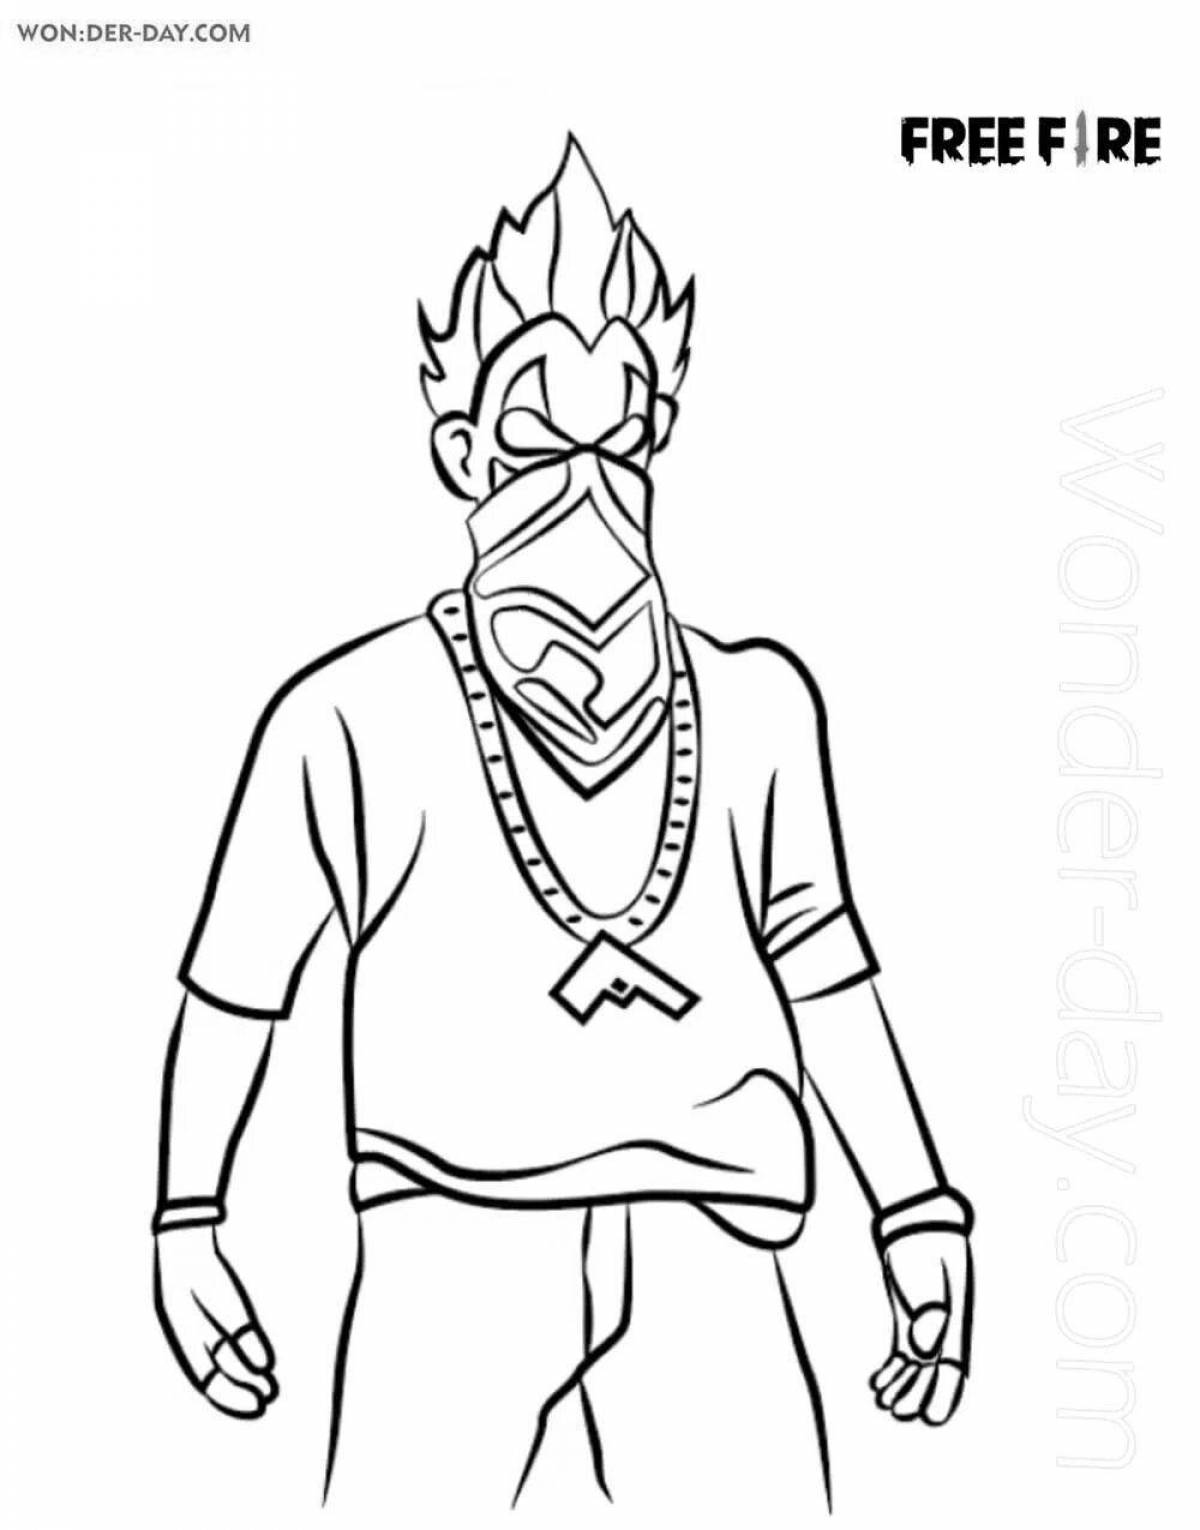 Majestic pro free fire coloring page